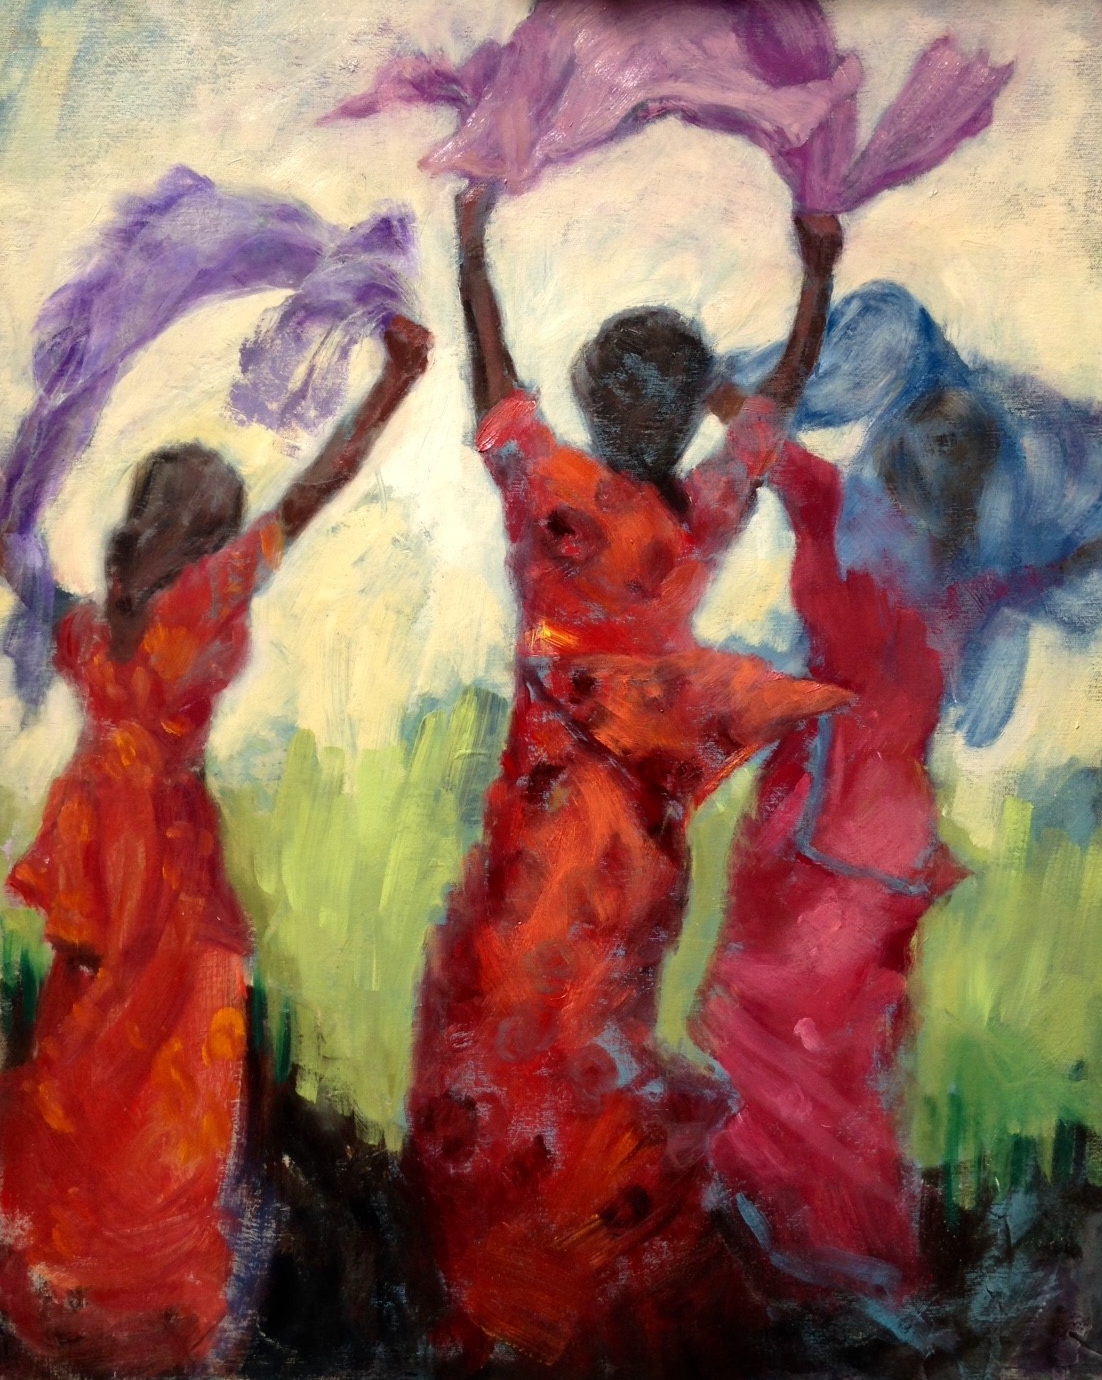 Pam Rubenstein "Dancing with Scarves" Oil